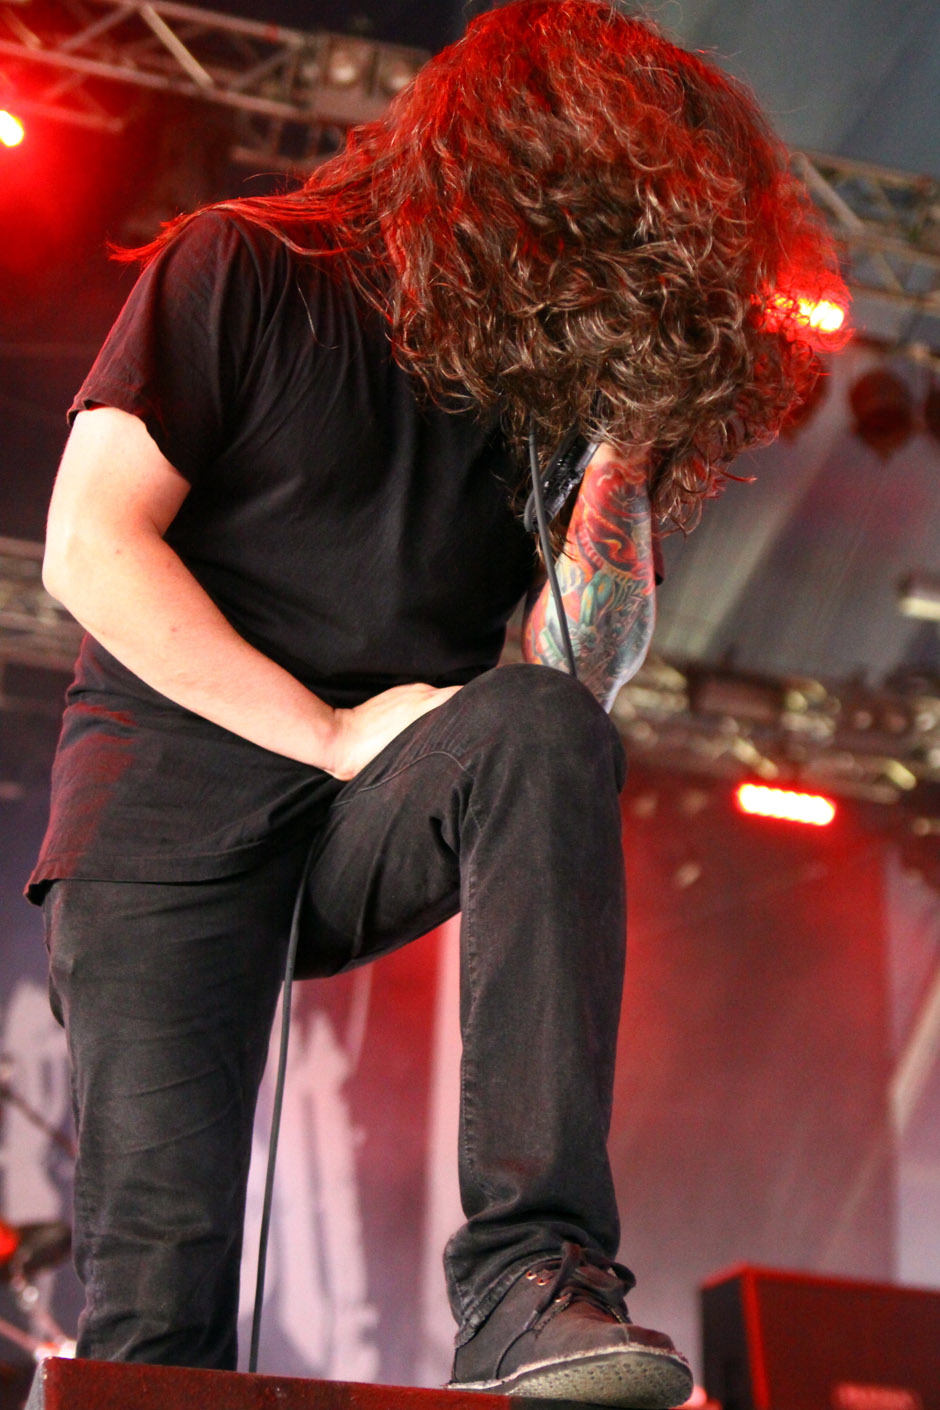 All Shall Perish, With Full Force, 30.06.2012